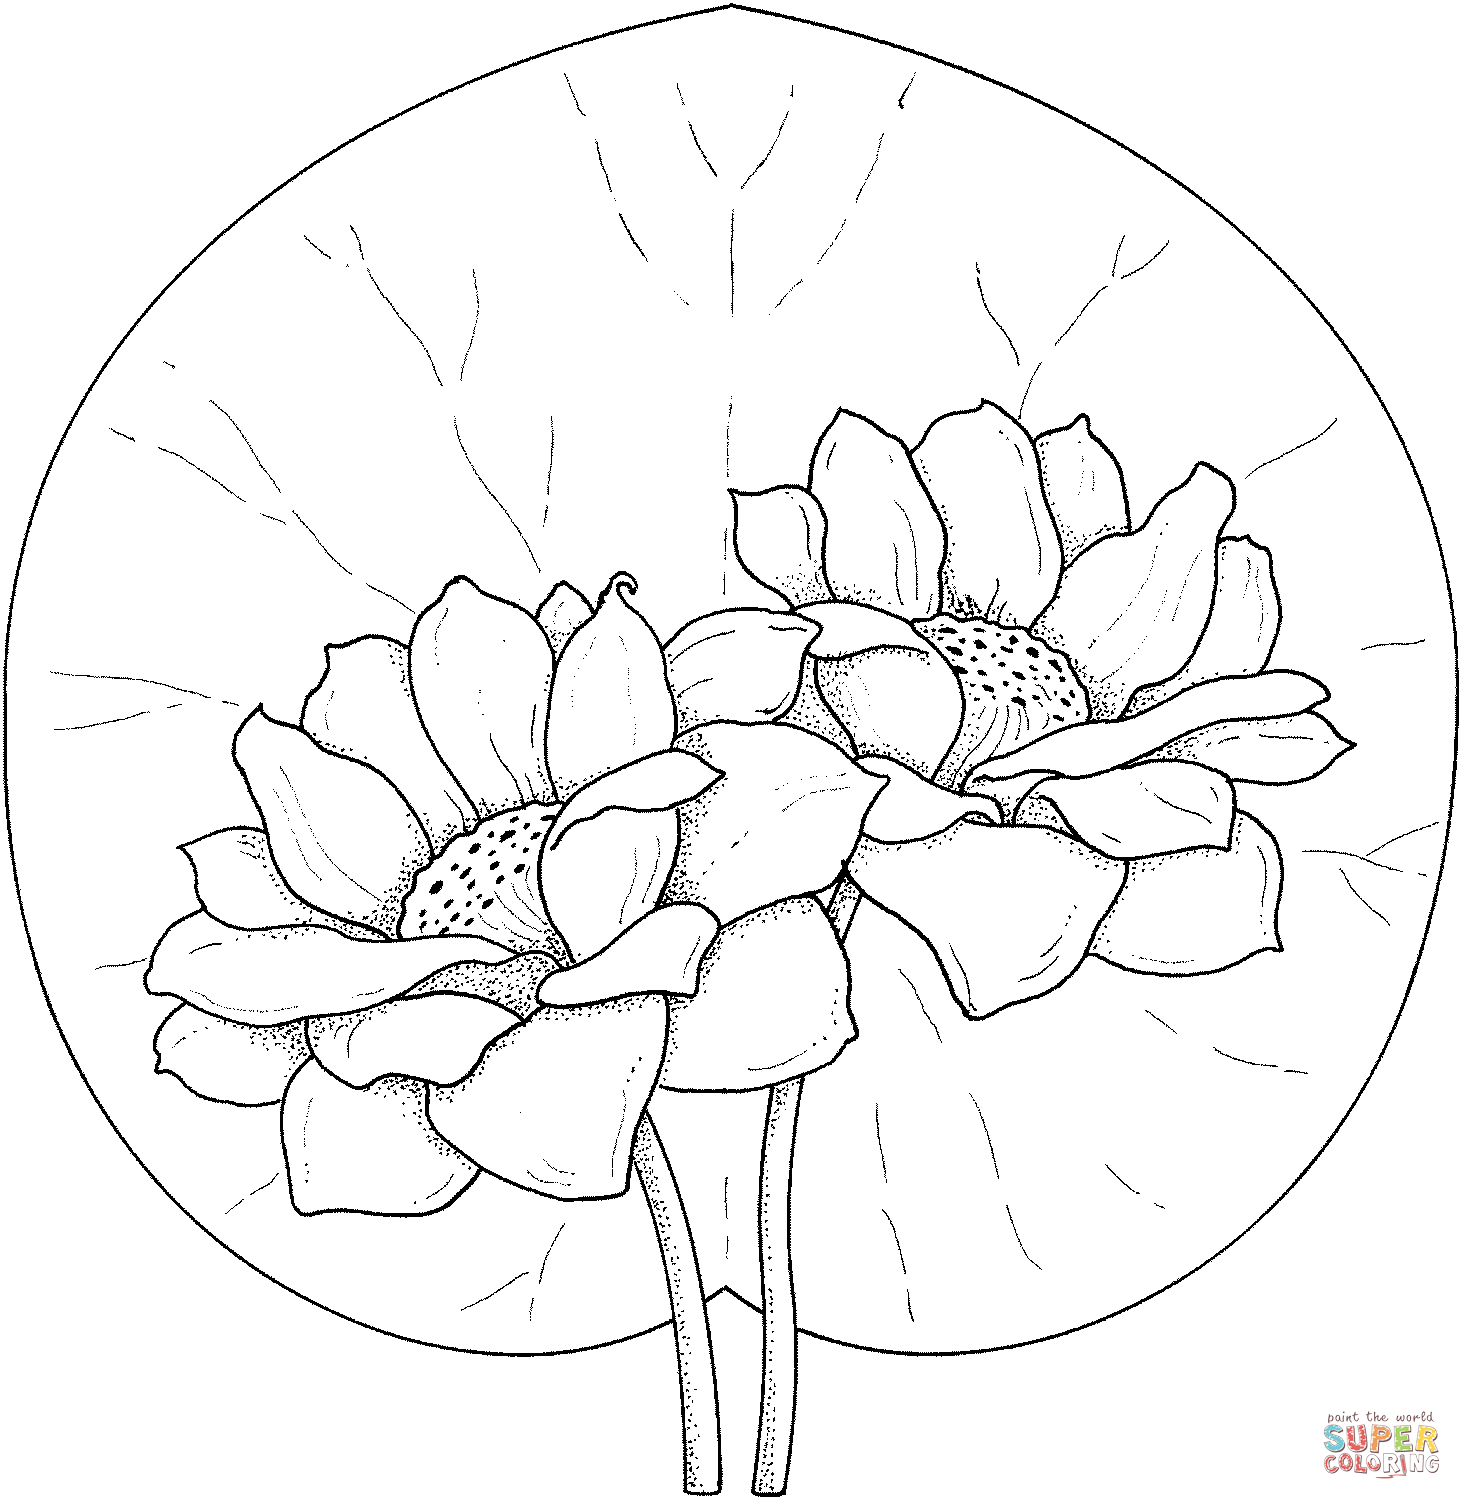 Water lily coloring pages | Free Coloring Pages